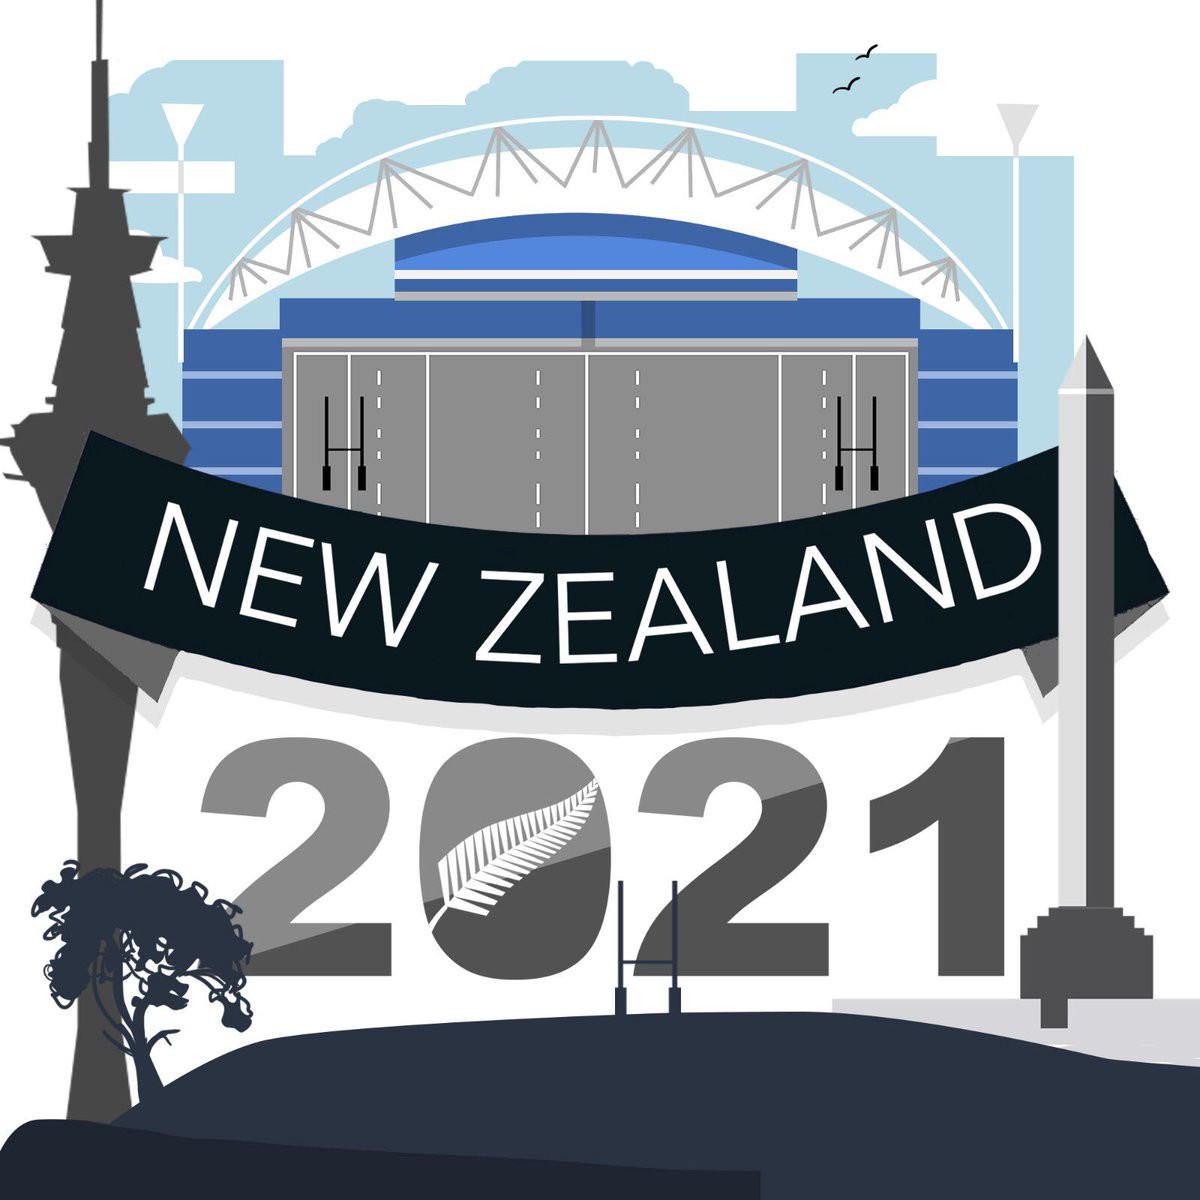 New Zealand beat Australia to be awarded the 2021 Women's Rugby World Cup ©NZ Rugby